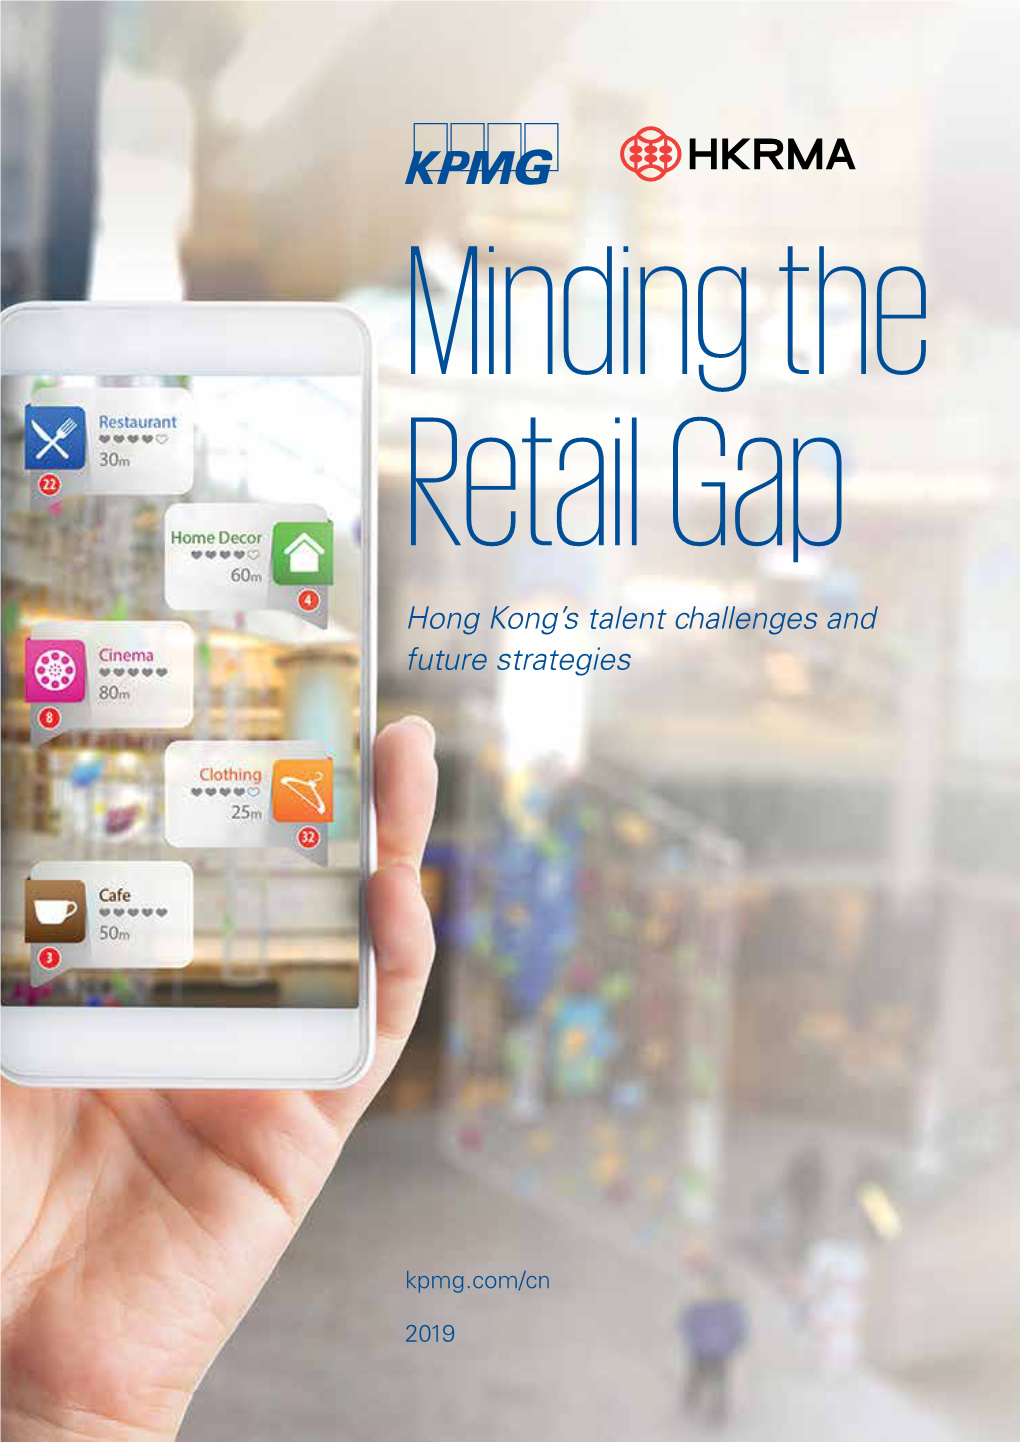 Minding the Retail Gap: Hong Kong's Talent Challenges and Future Strategies